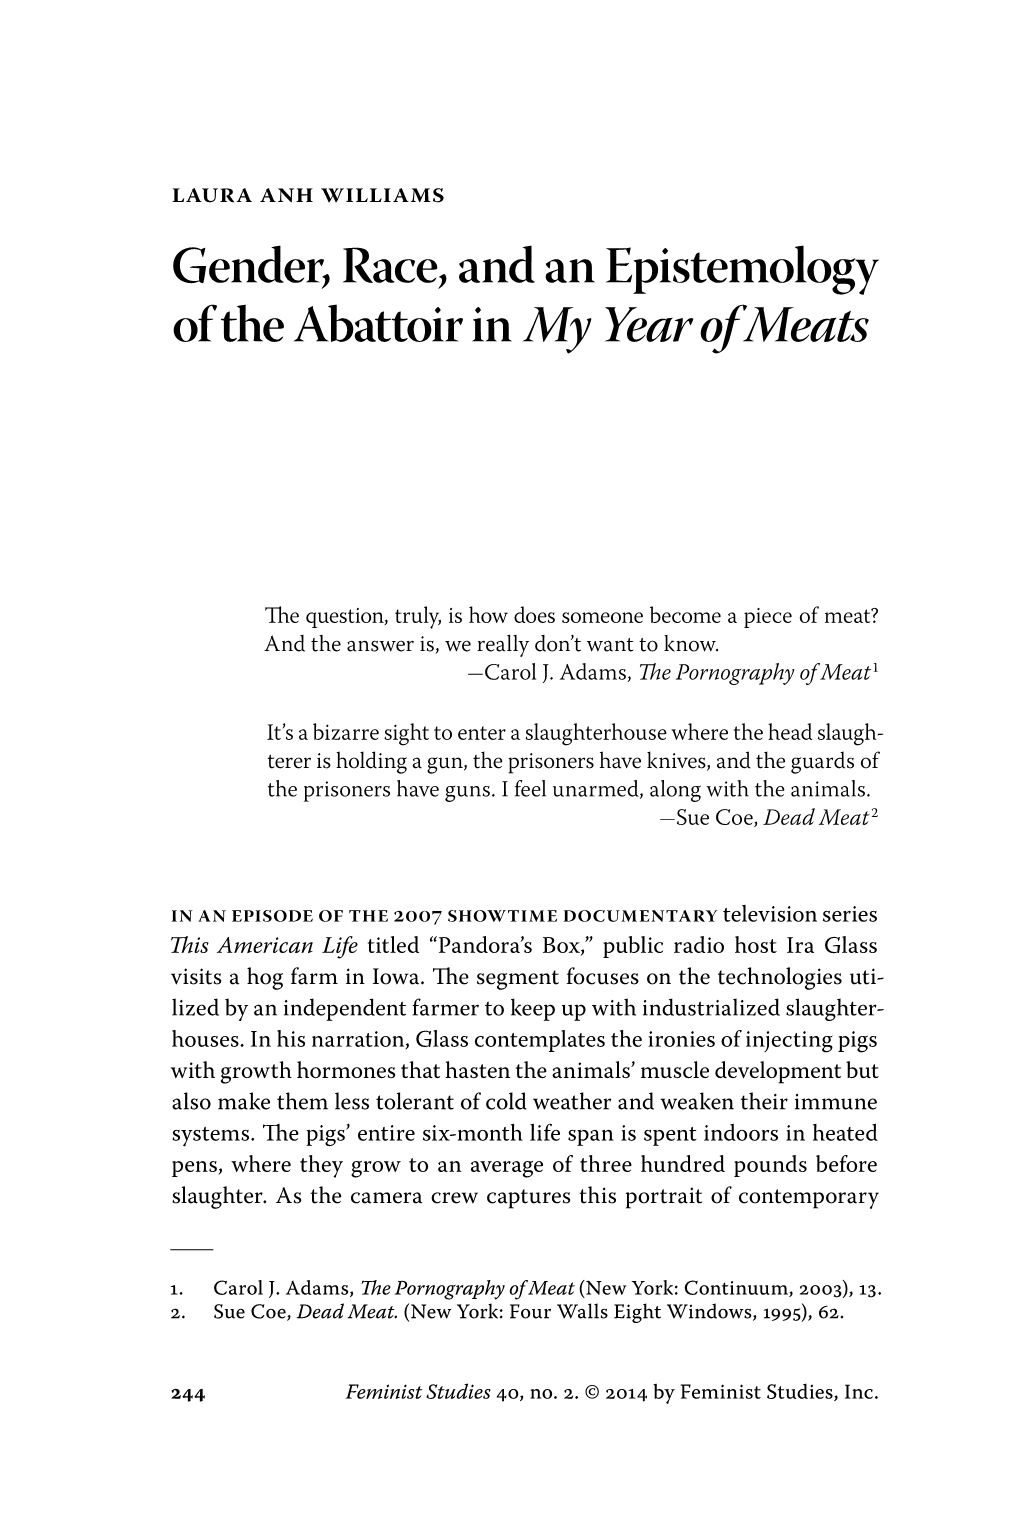 Gender, Race, and an Epistemology of the Abattoir in "My Year of Meats"